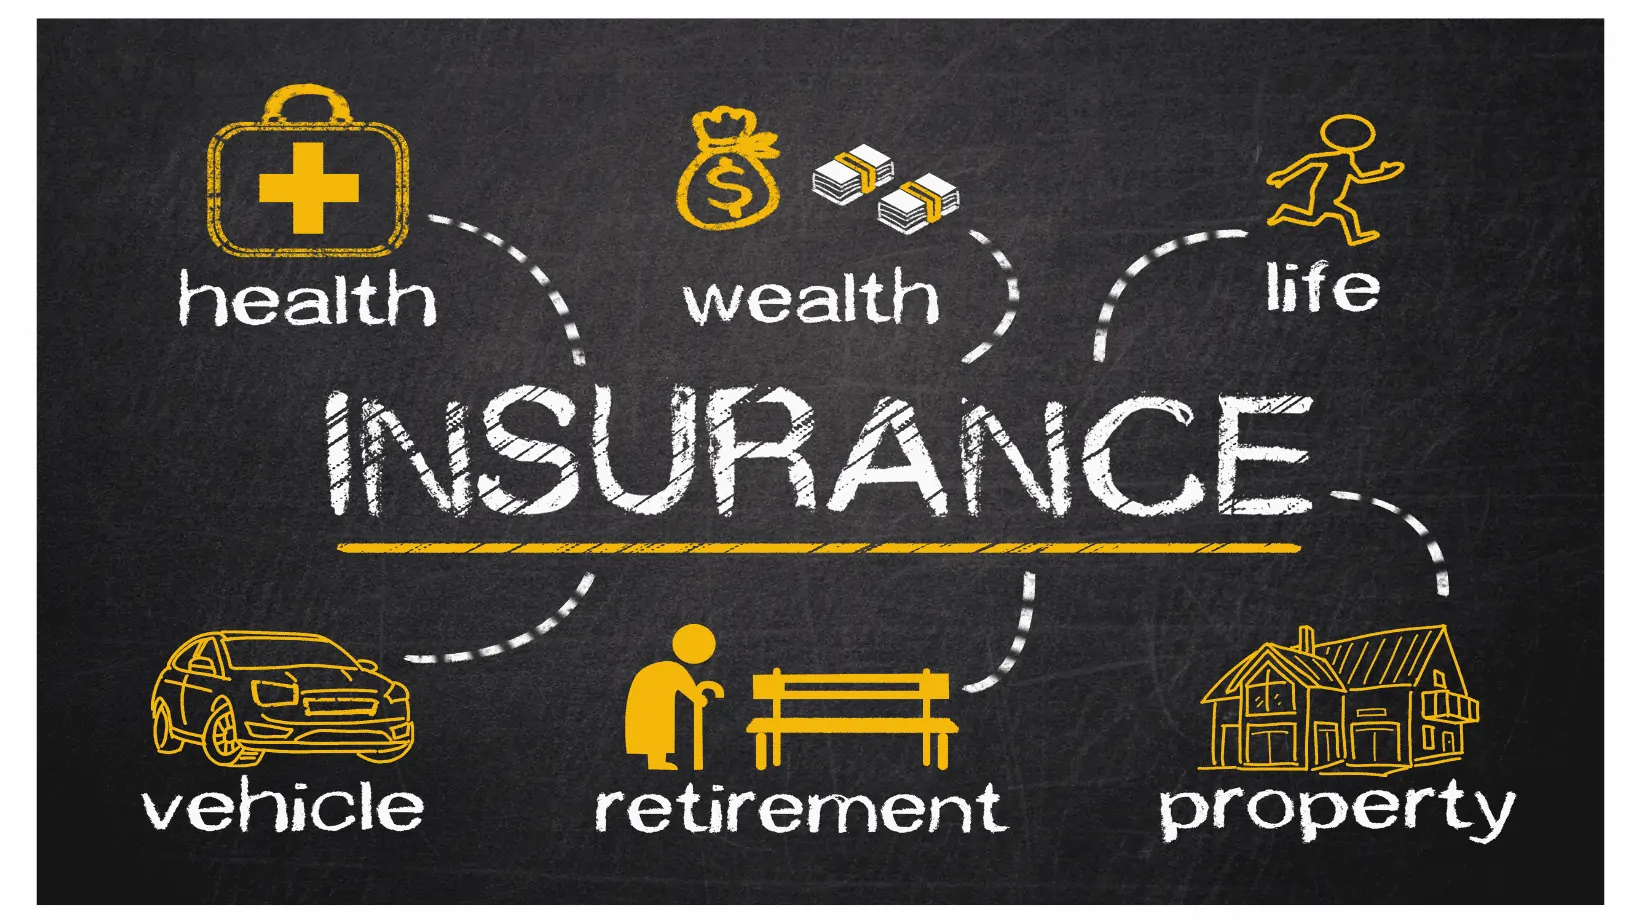 Life insurance 101 in South Africa: How to choose the right policy